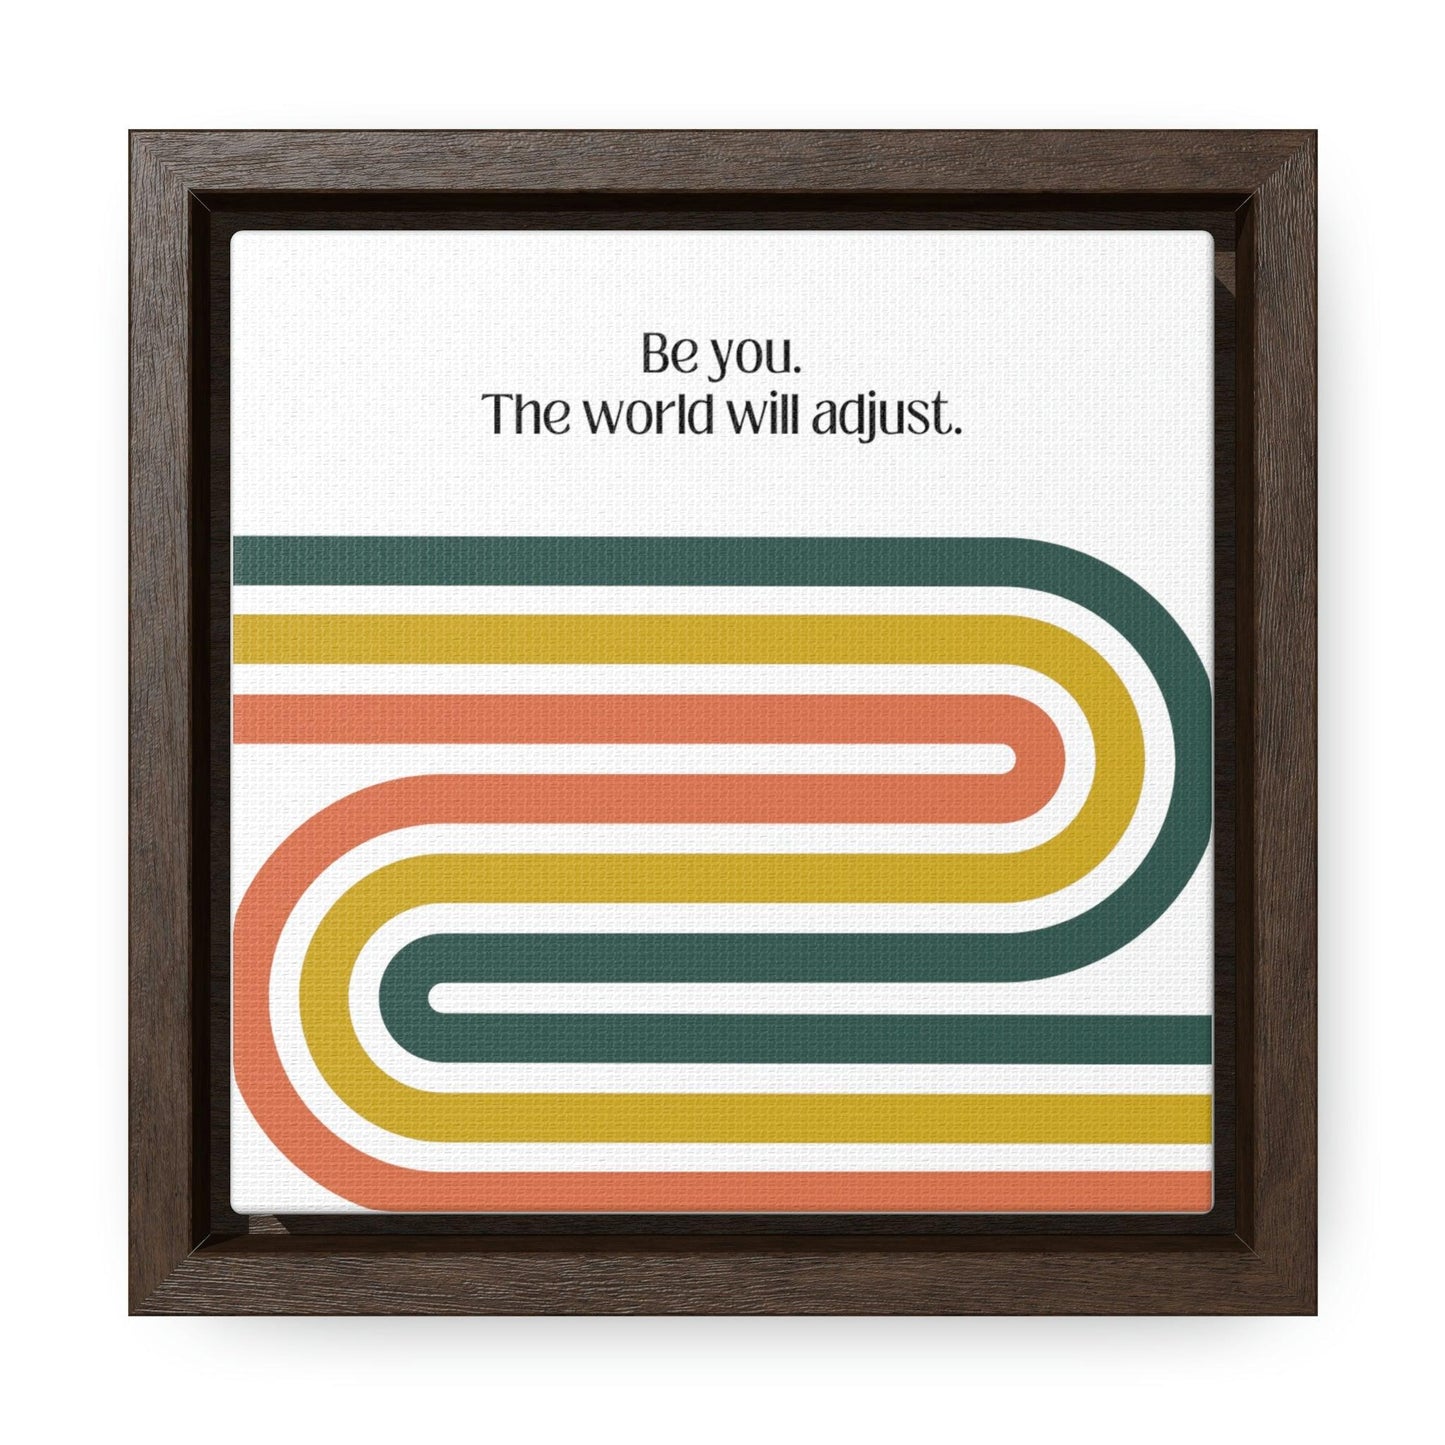 Be you. The world will adjust. - Gallery Canvas Wraps, Square Frame - Moxie Graphics